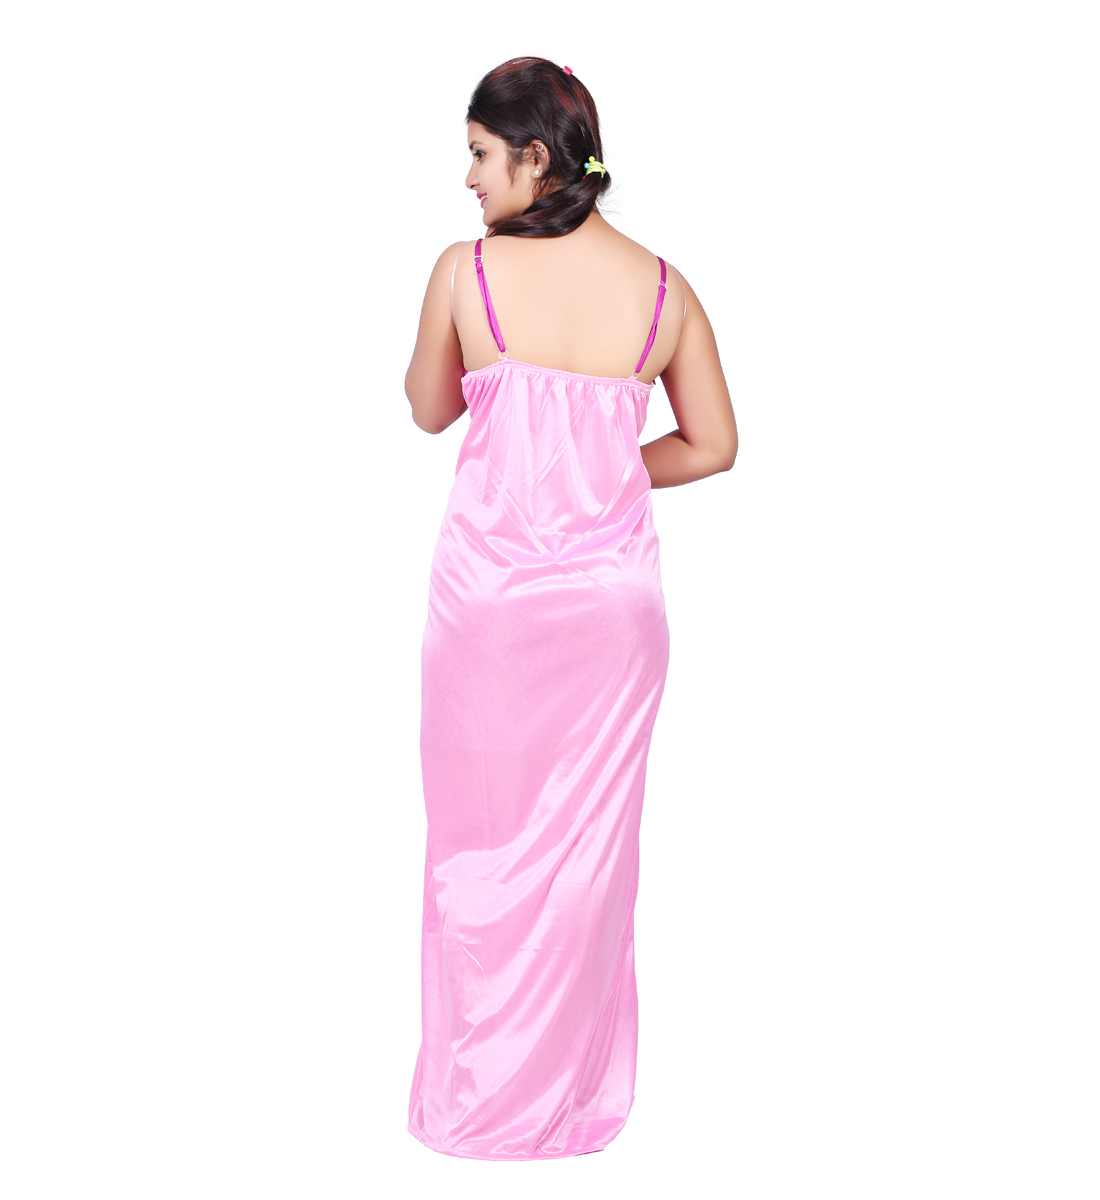 Buy Womens 2pc Satin Nighty With Robe Online ₹999 From Shopclues